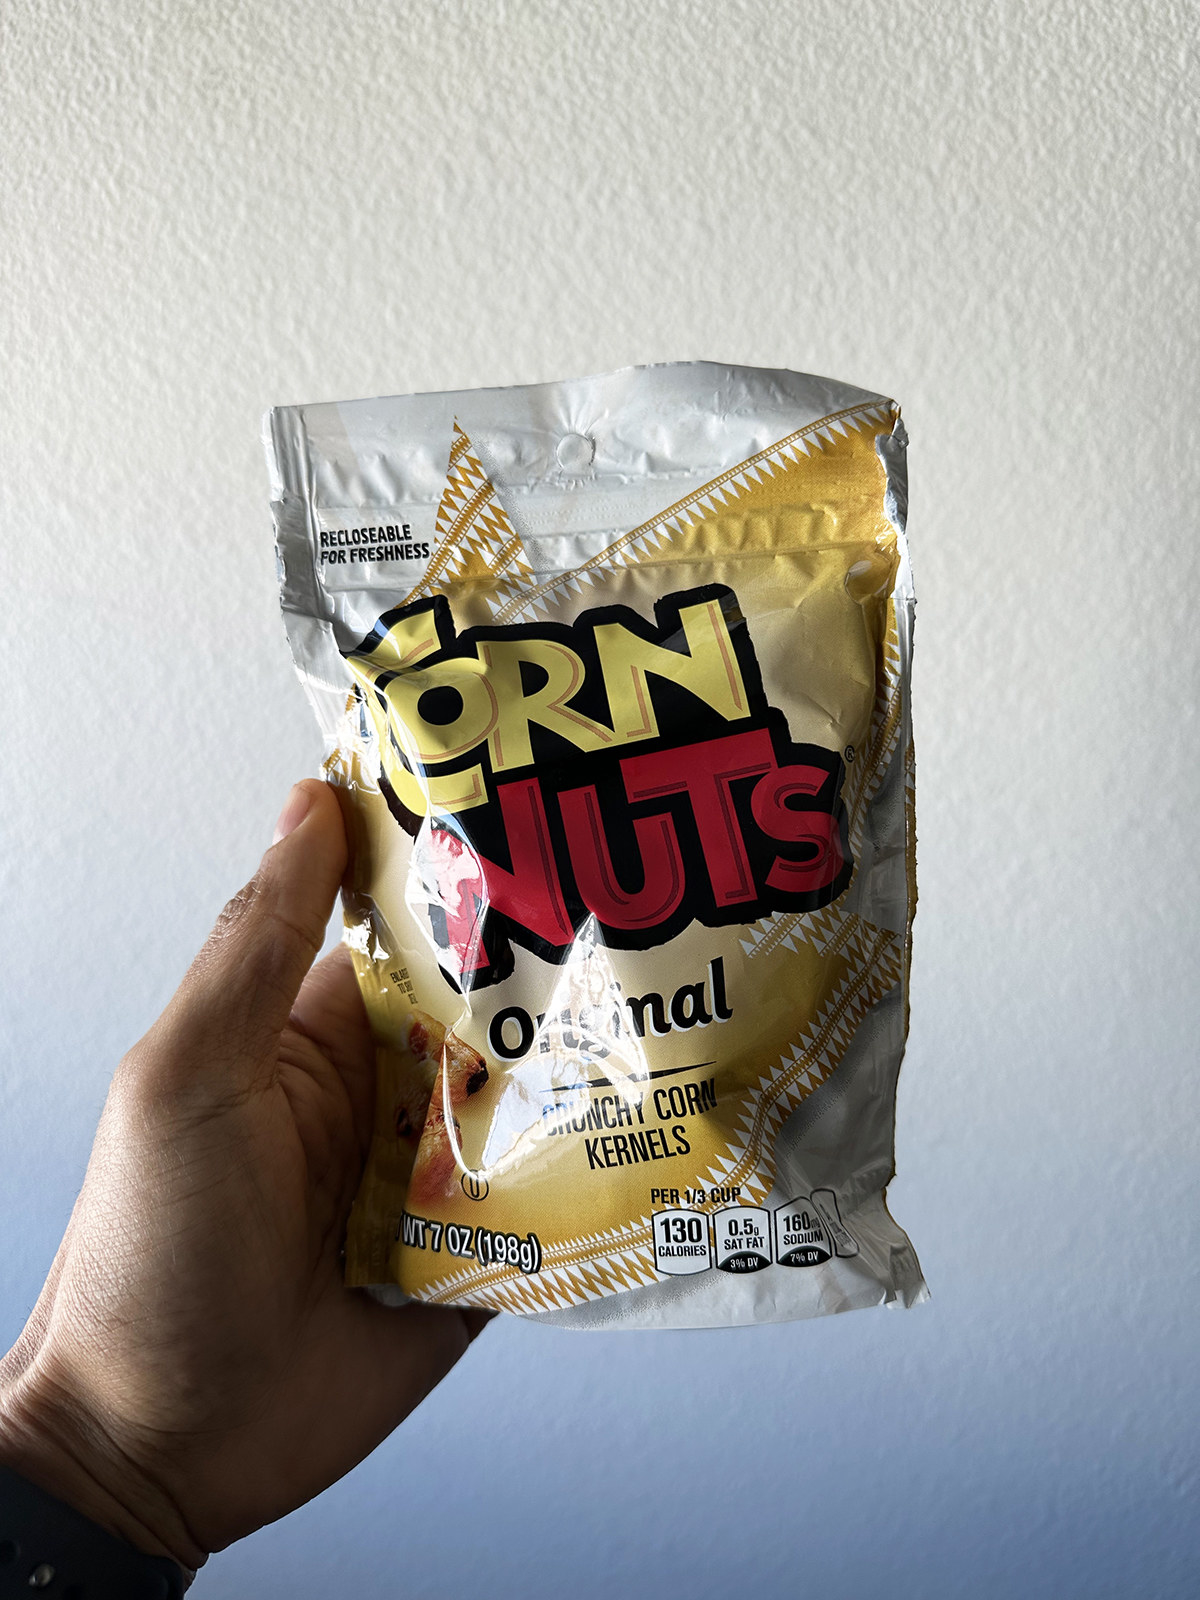 A hand holding a pack of Corn Nuts Original Crunchy Corn Kernels